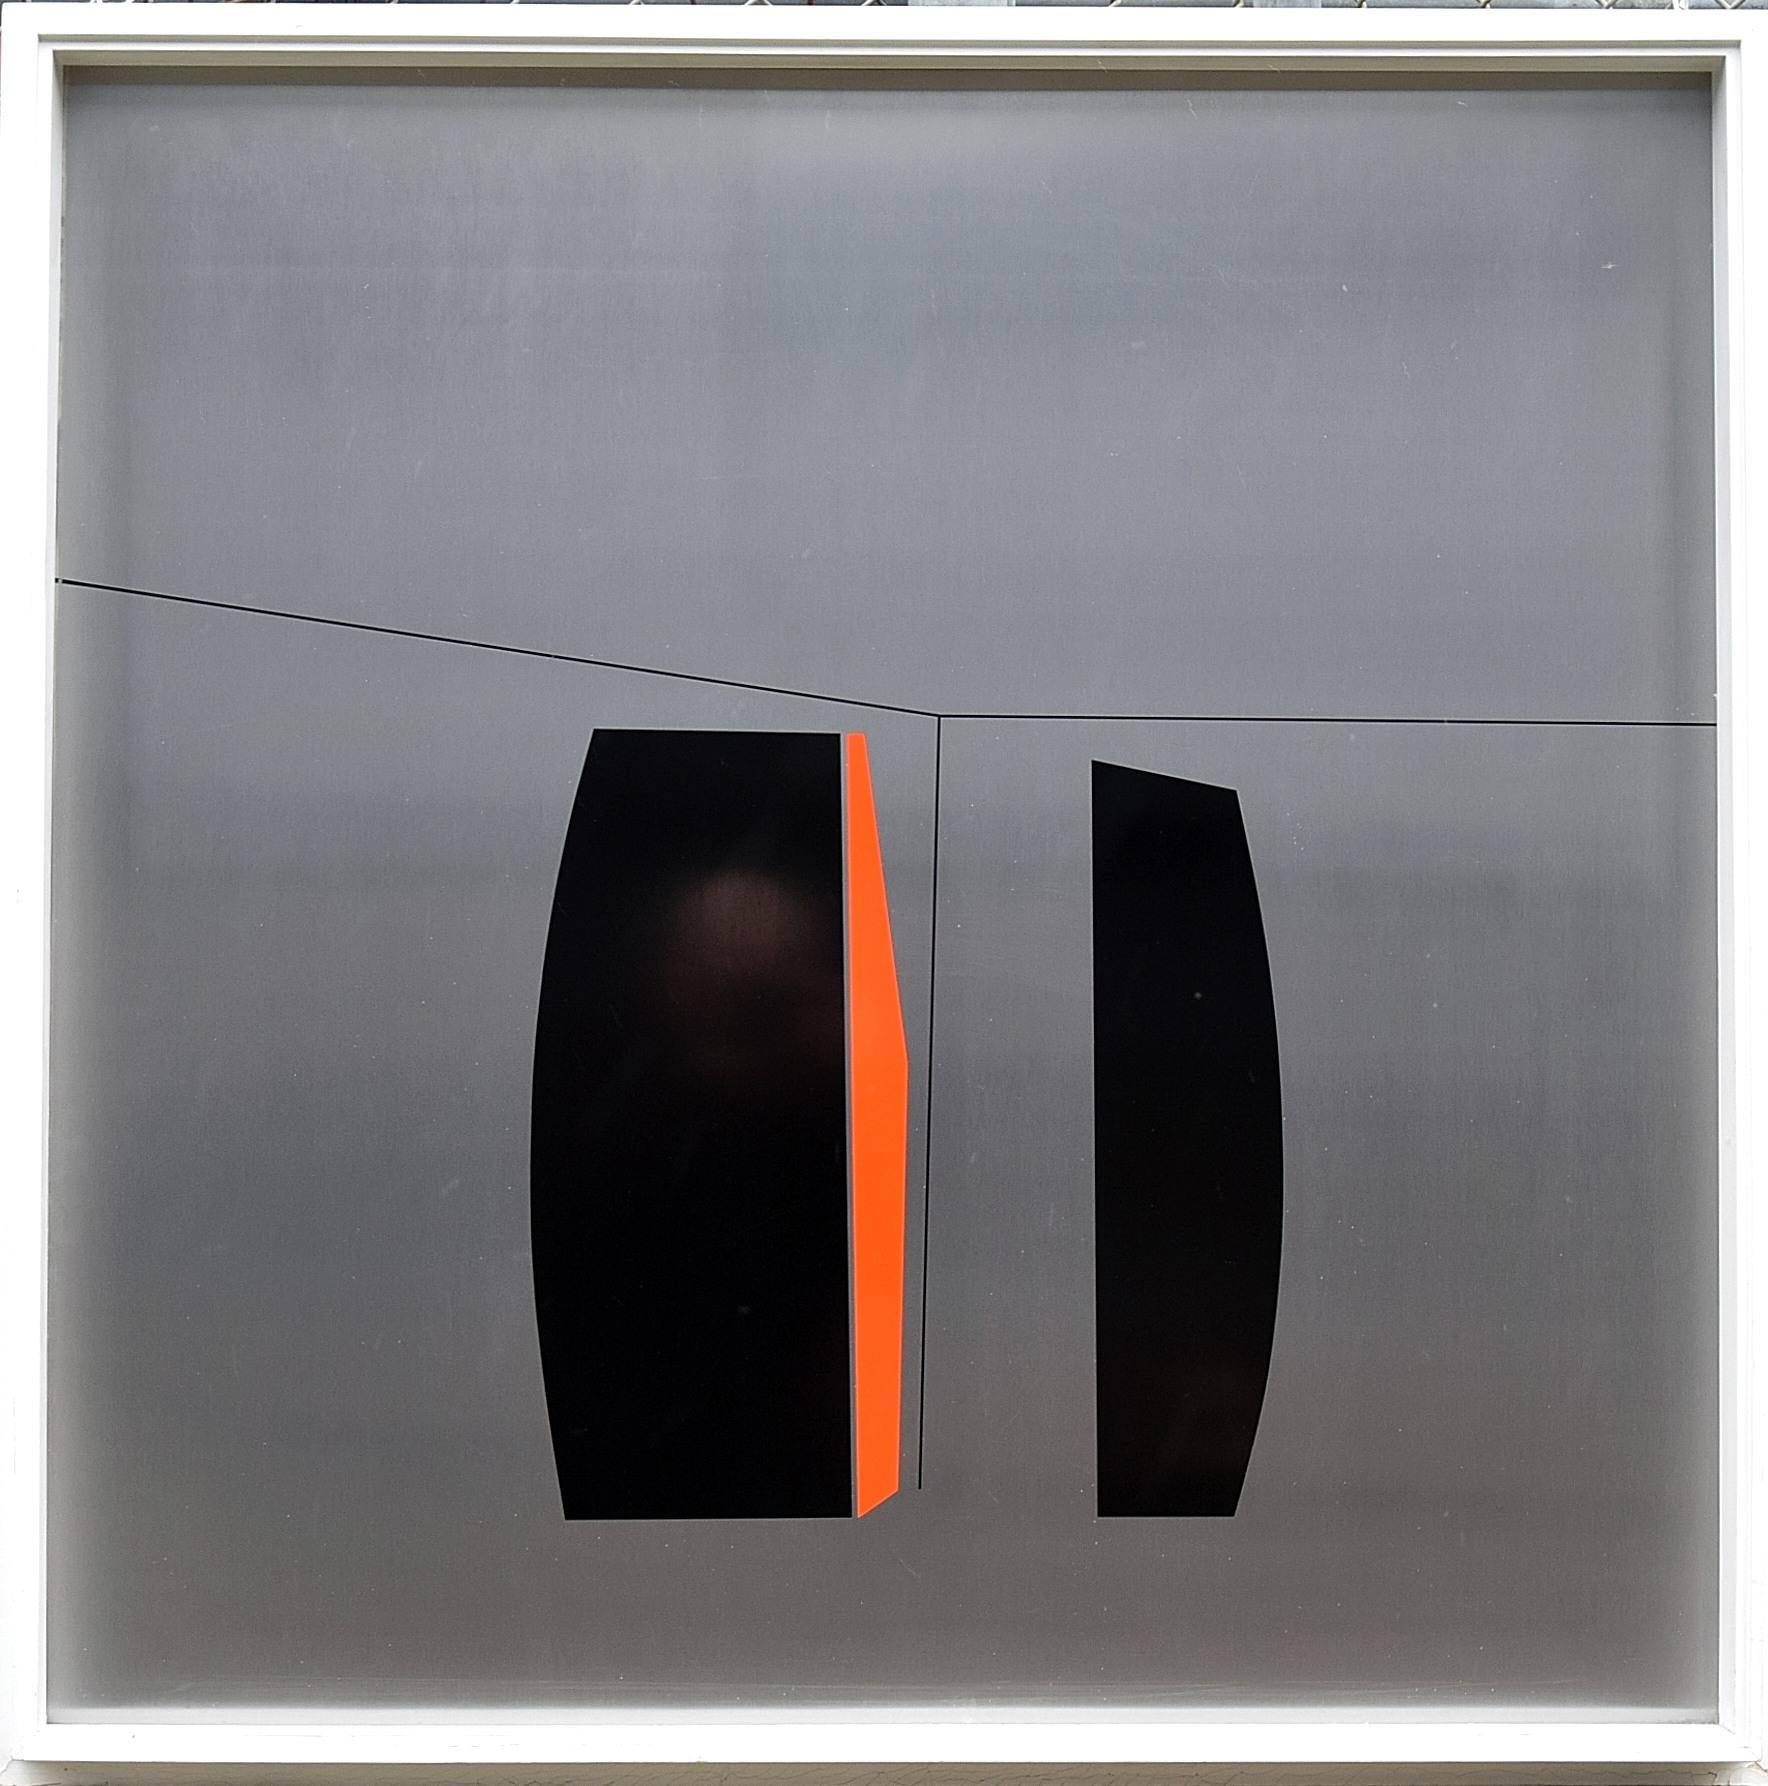 Giorgio Tonti painting on stainless steel for Studio zero Milano, 1970. This rare piece comes with its original frame.
Measurements: 106 x 106 x 6 cm.
The painting will be shipped insured overseas in a custom made wooden crate. Cost of transport